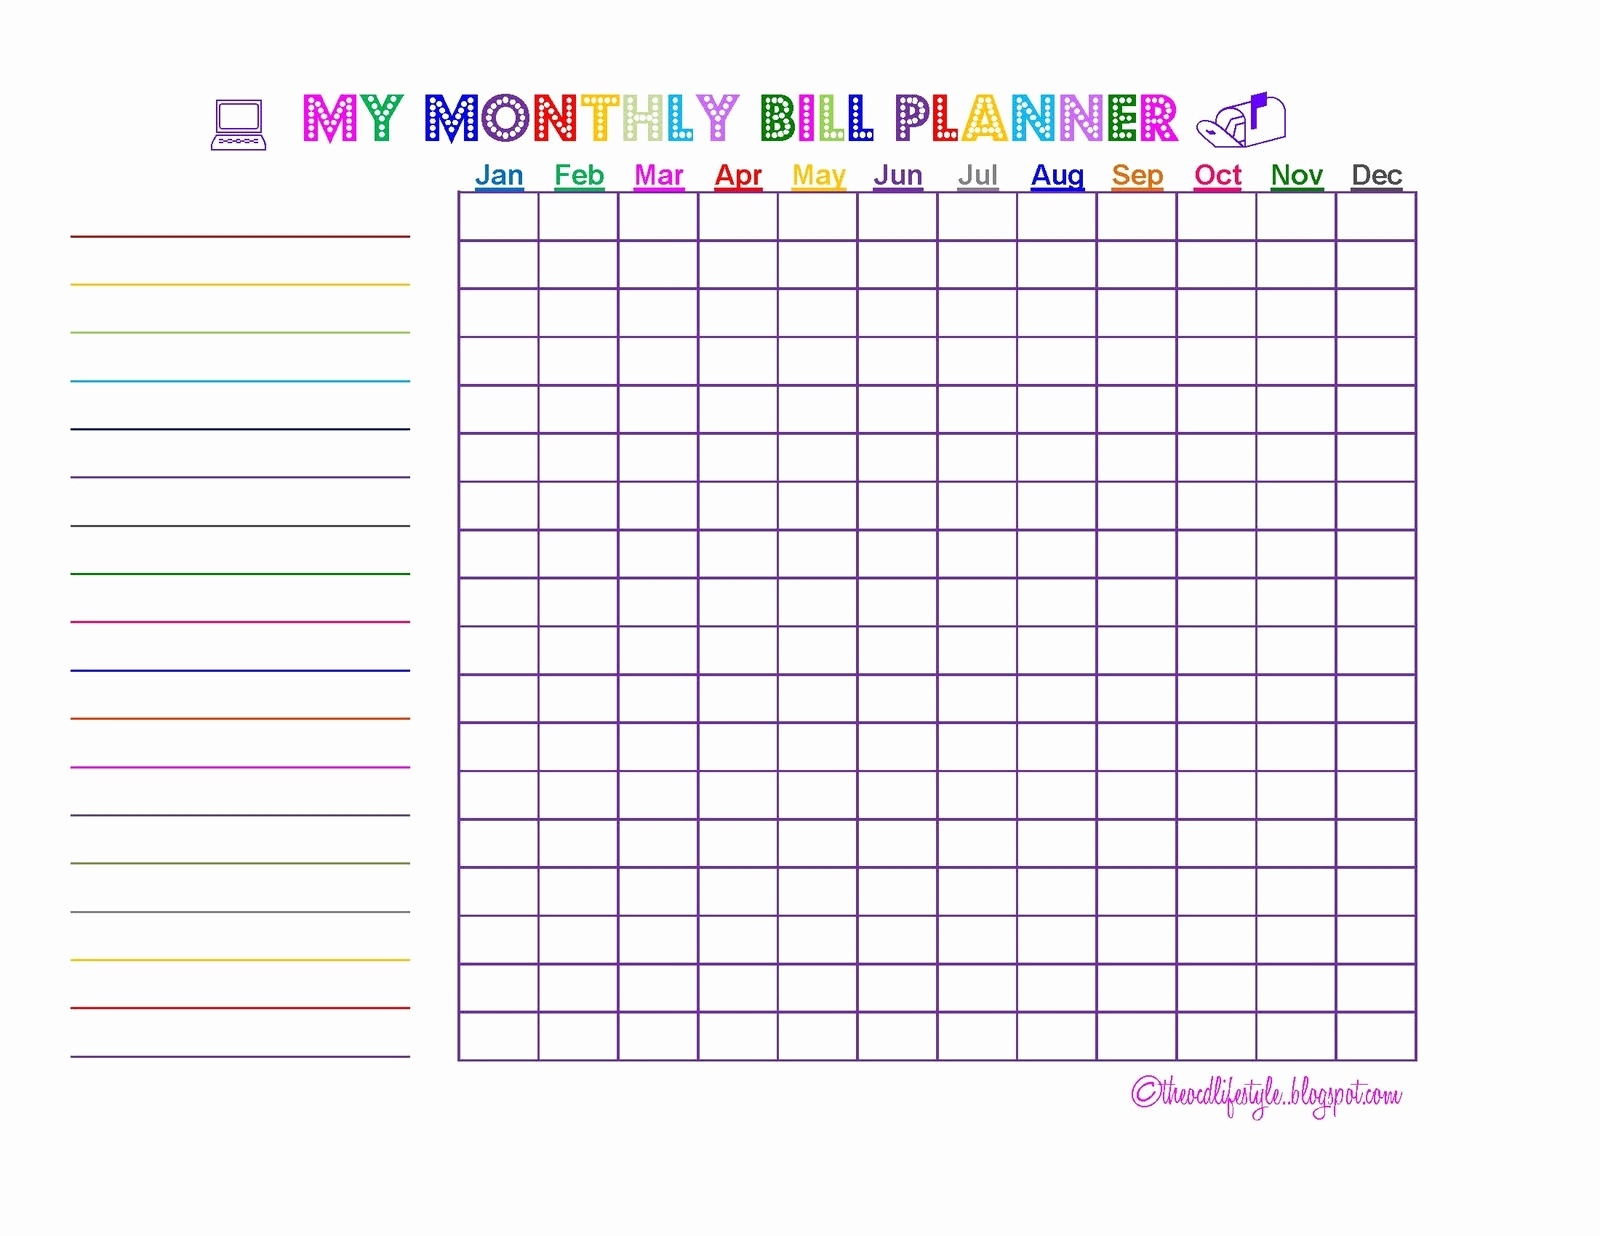 50 Lovely Printable Bill Paying Checklist - Documents Ideas  Printable Monthly Bill Payment Worksheet